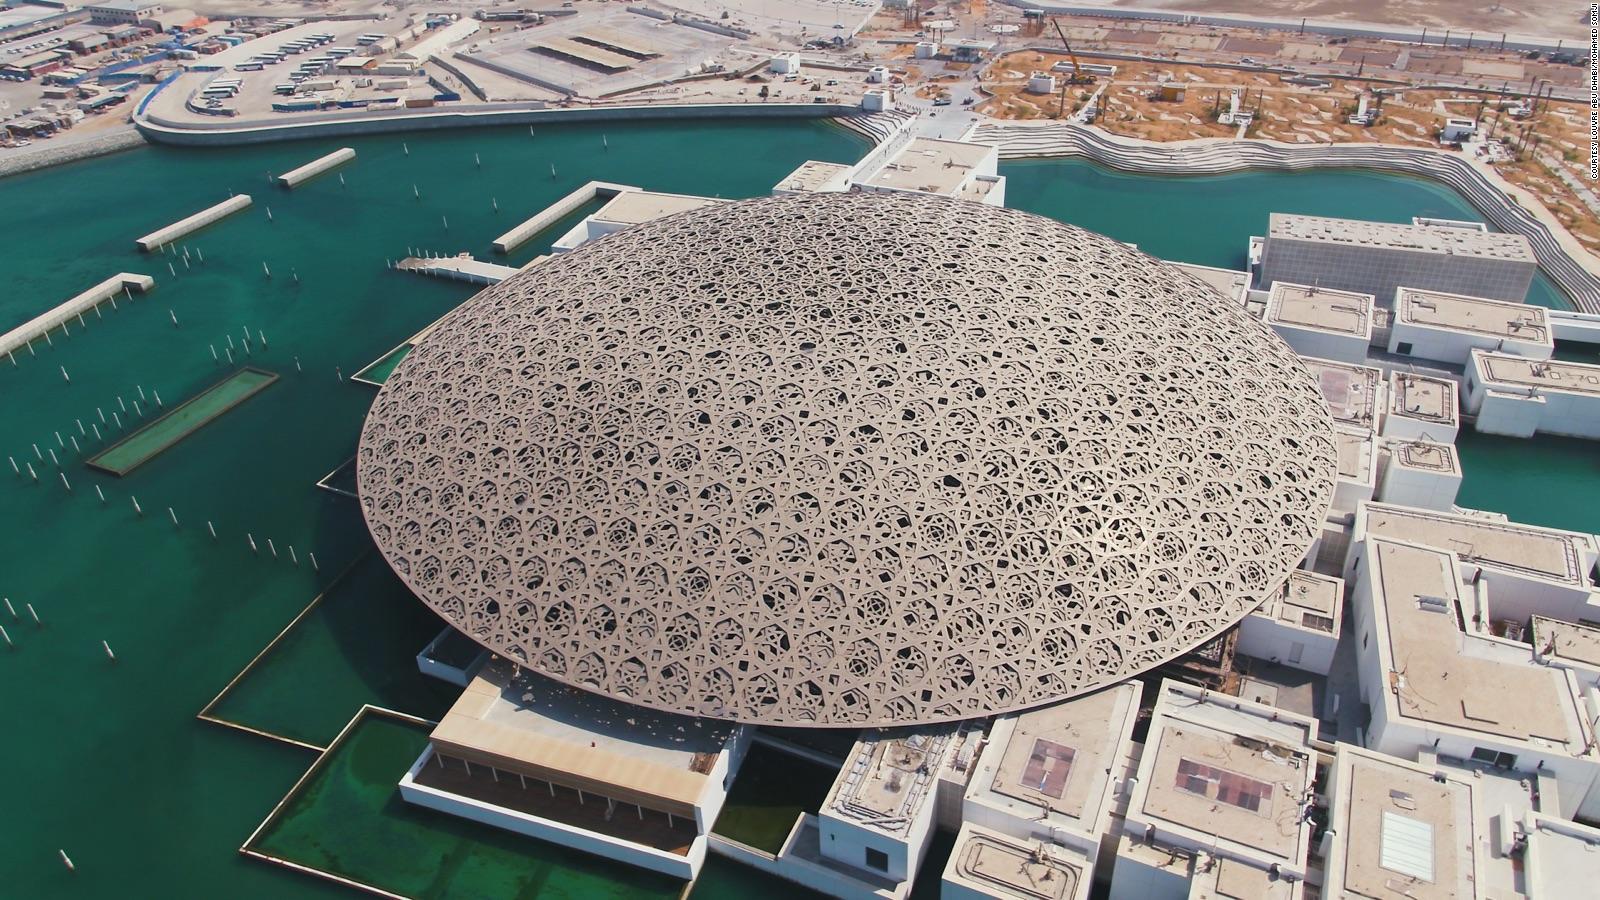 Louvre Abu Dhabi Receives Million Visitors In Its First Year